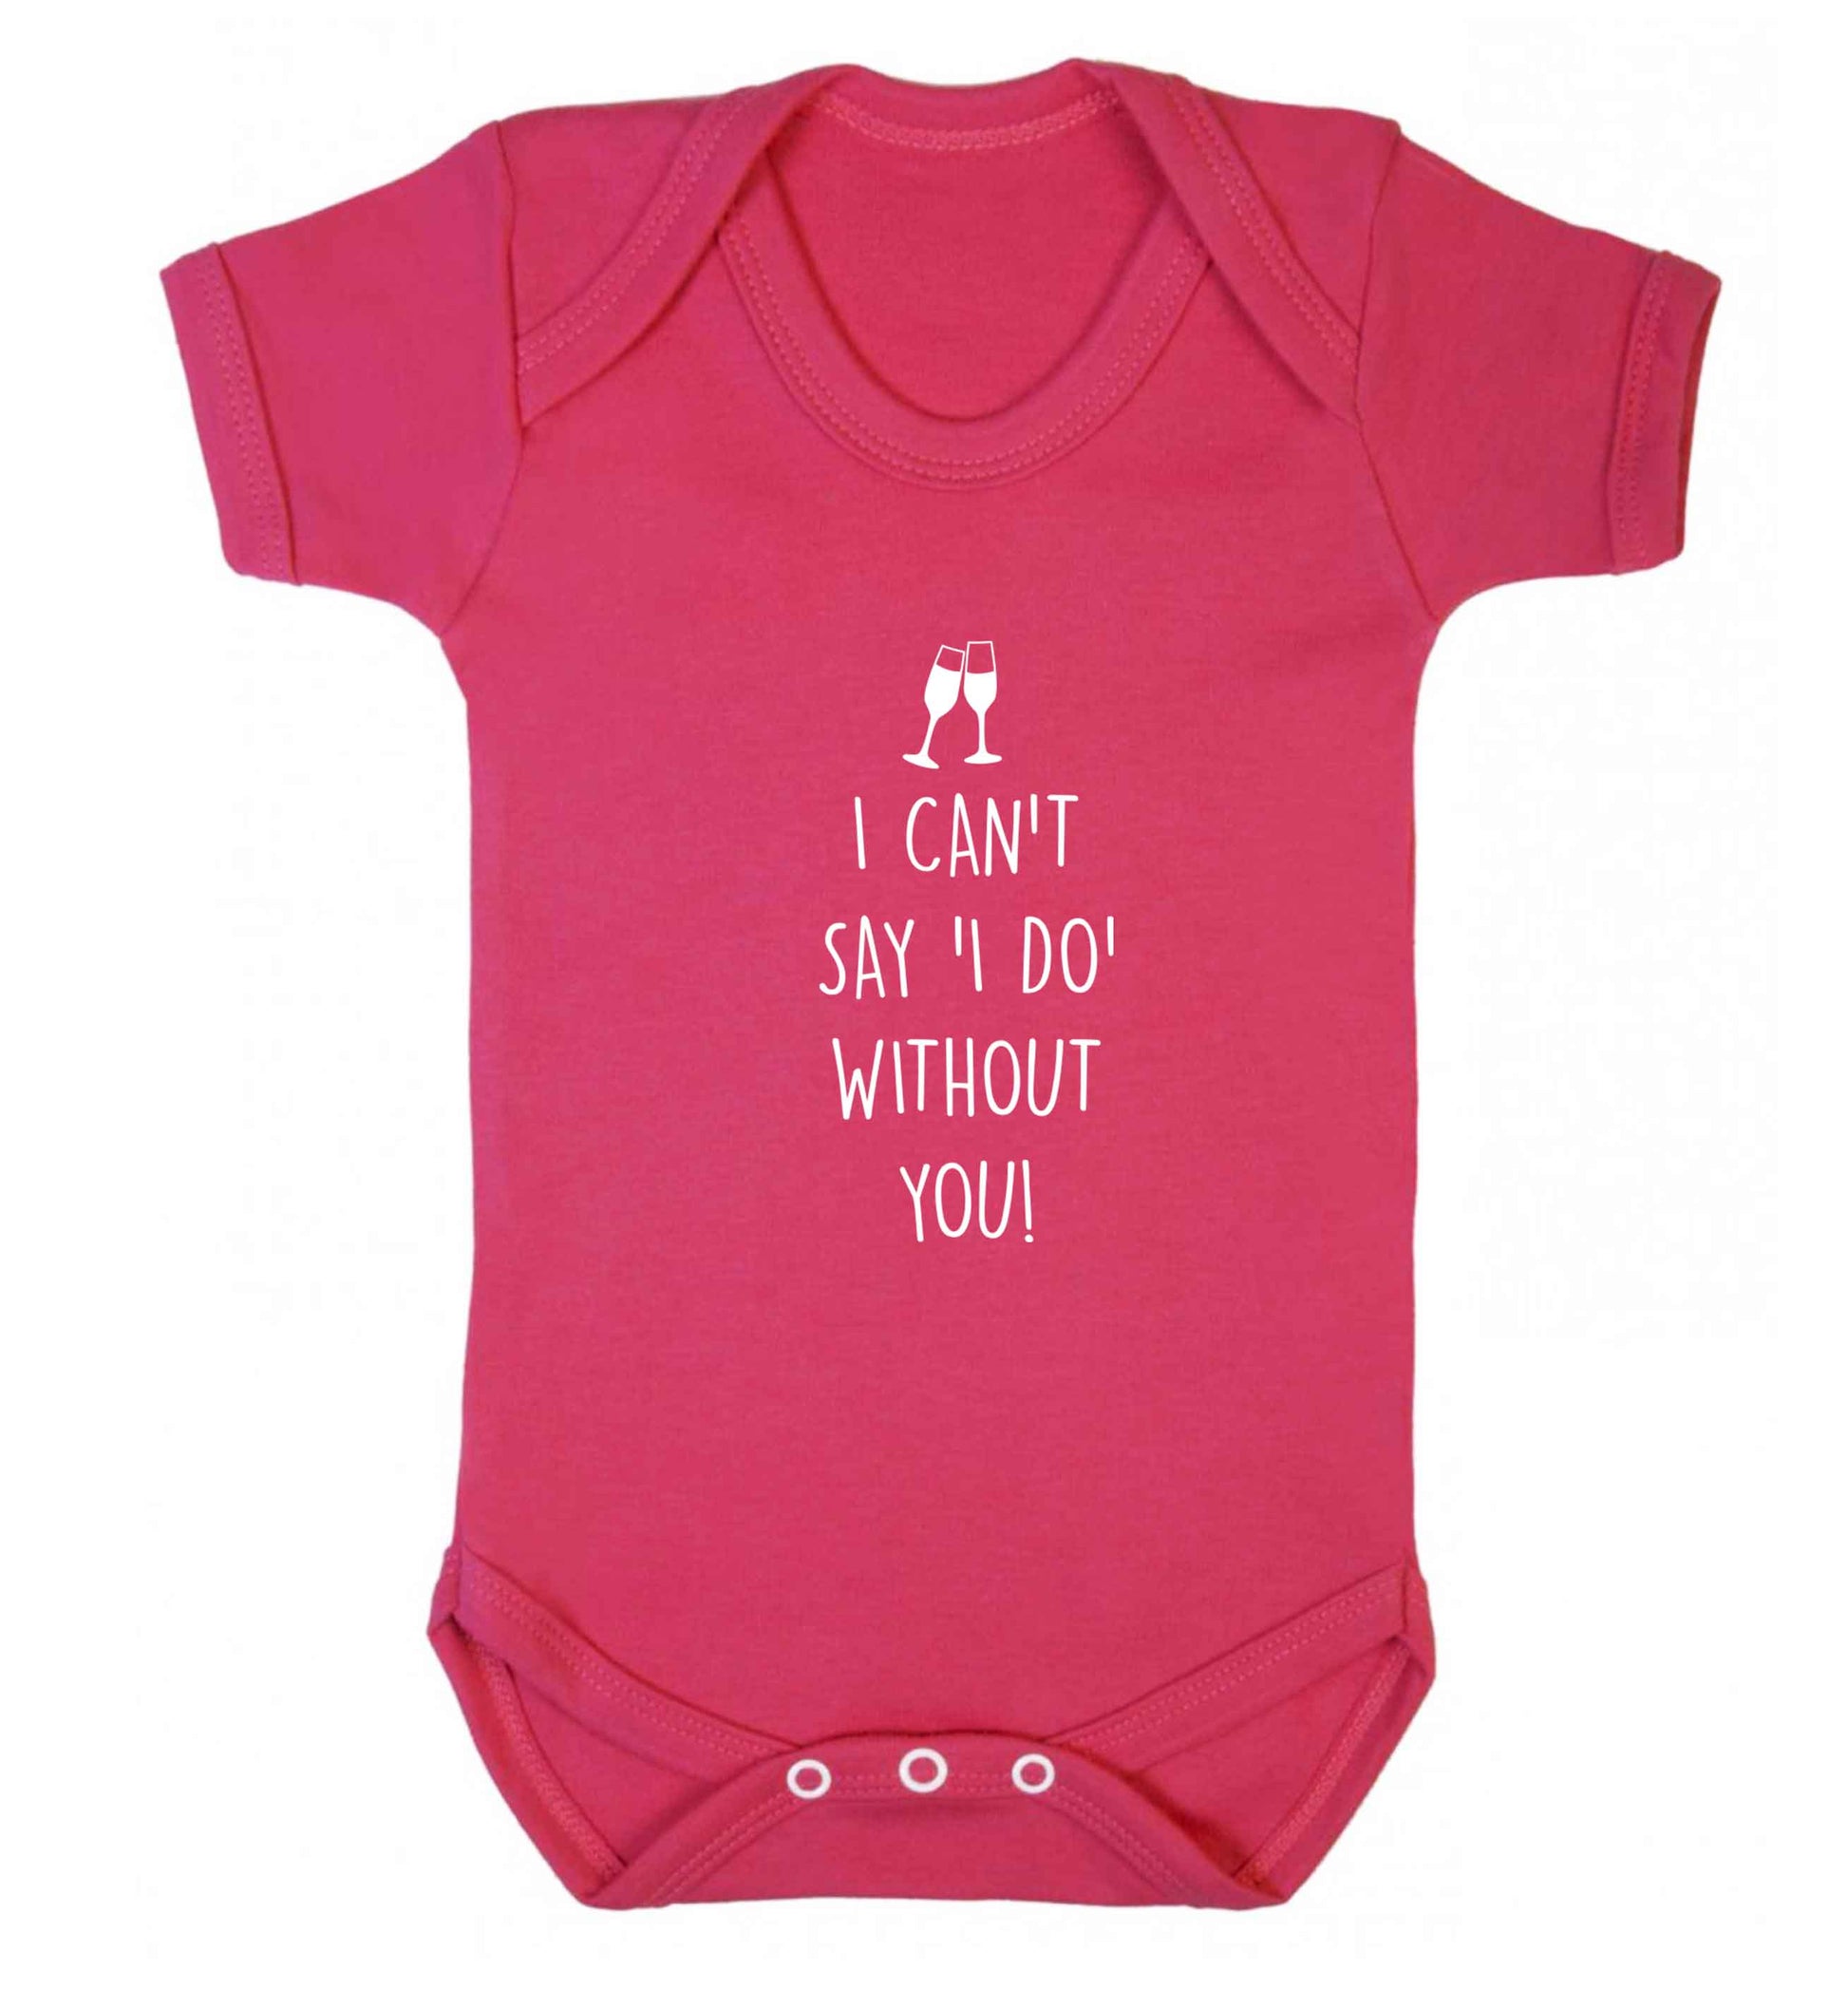 I can't say 'I do' without you! baby vest dark pink 18-24 months